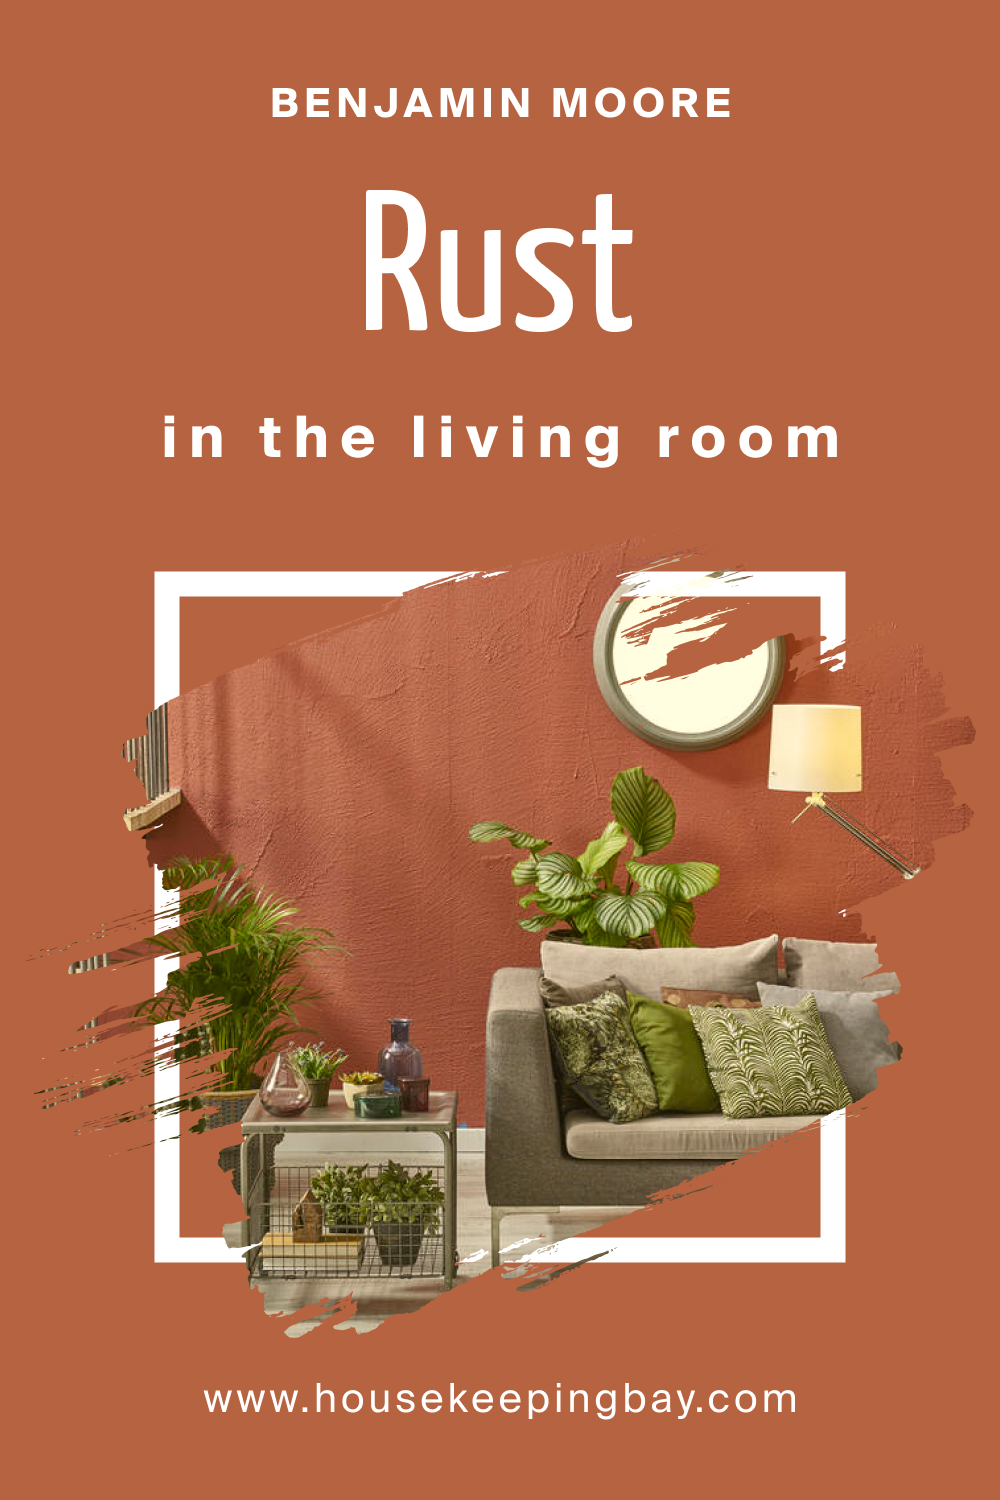 How to Use BM Rust 2175-30 in the Living Room?